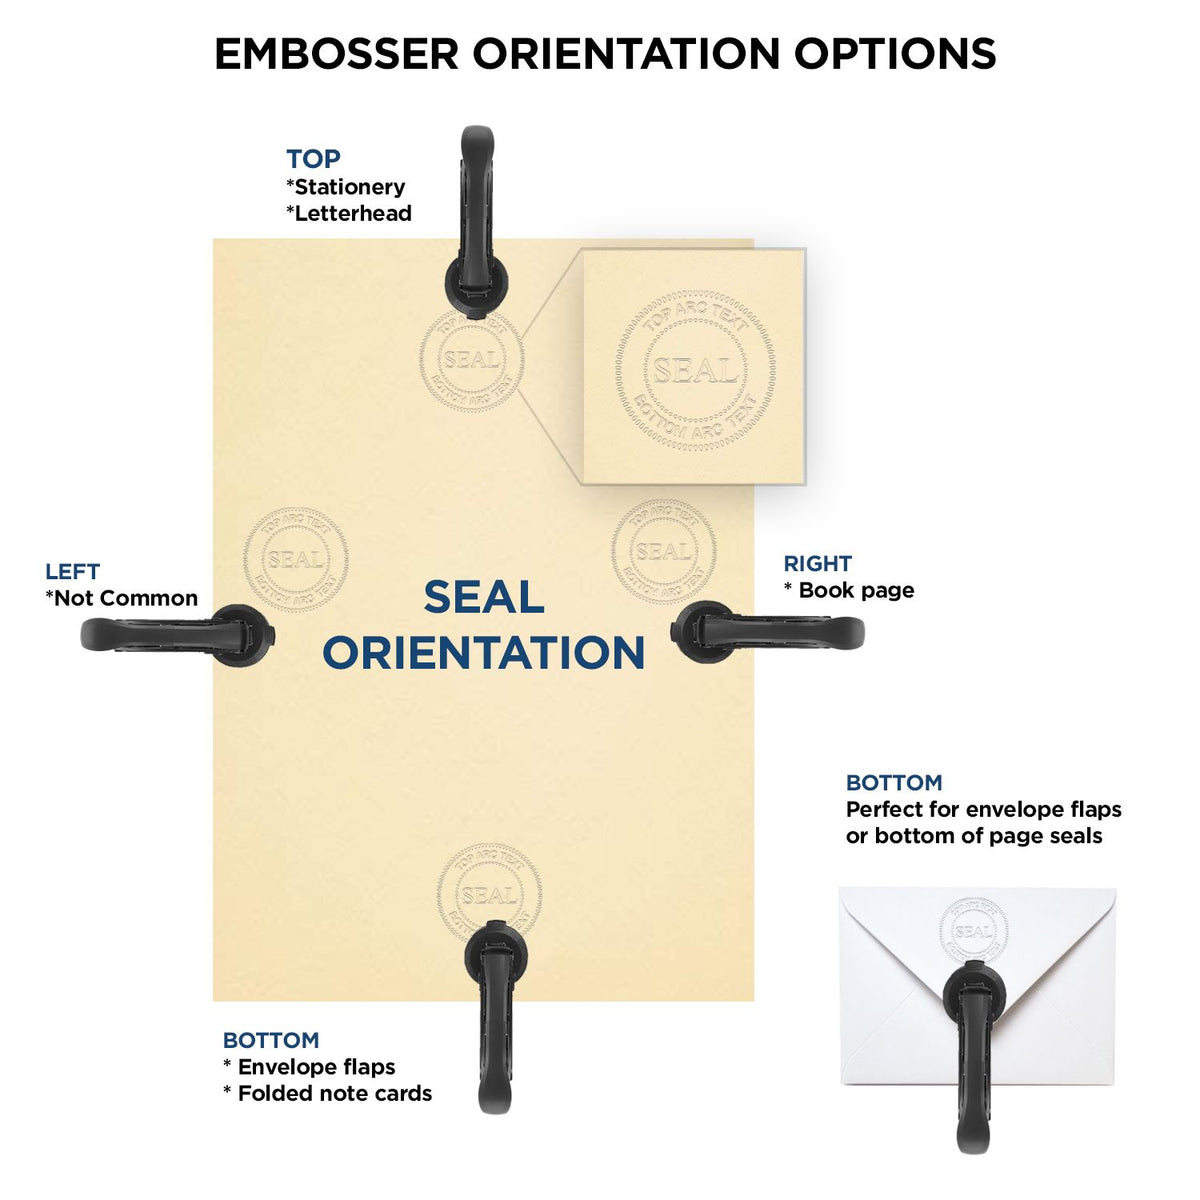 An infographic for the Handheld Ohio Professional Engineer Embosser showing embosser orientation, this is showing examples of a top, bottom, right and left insert.